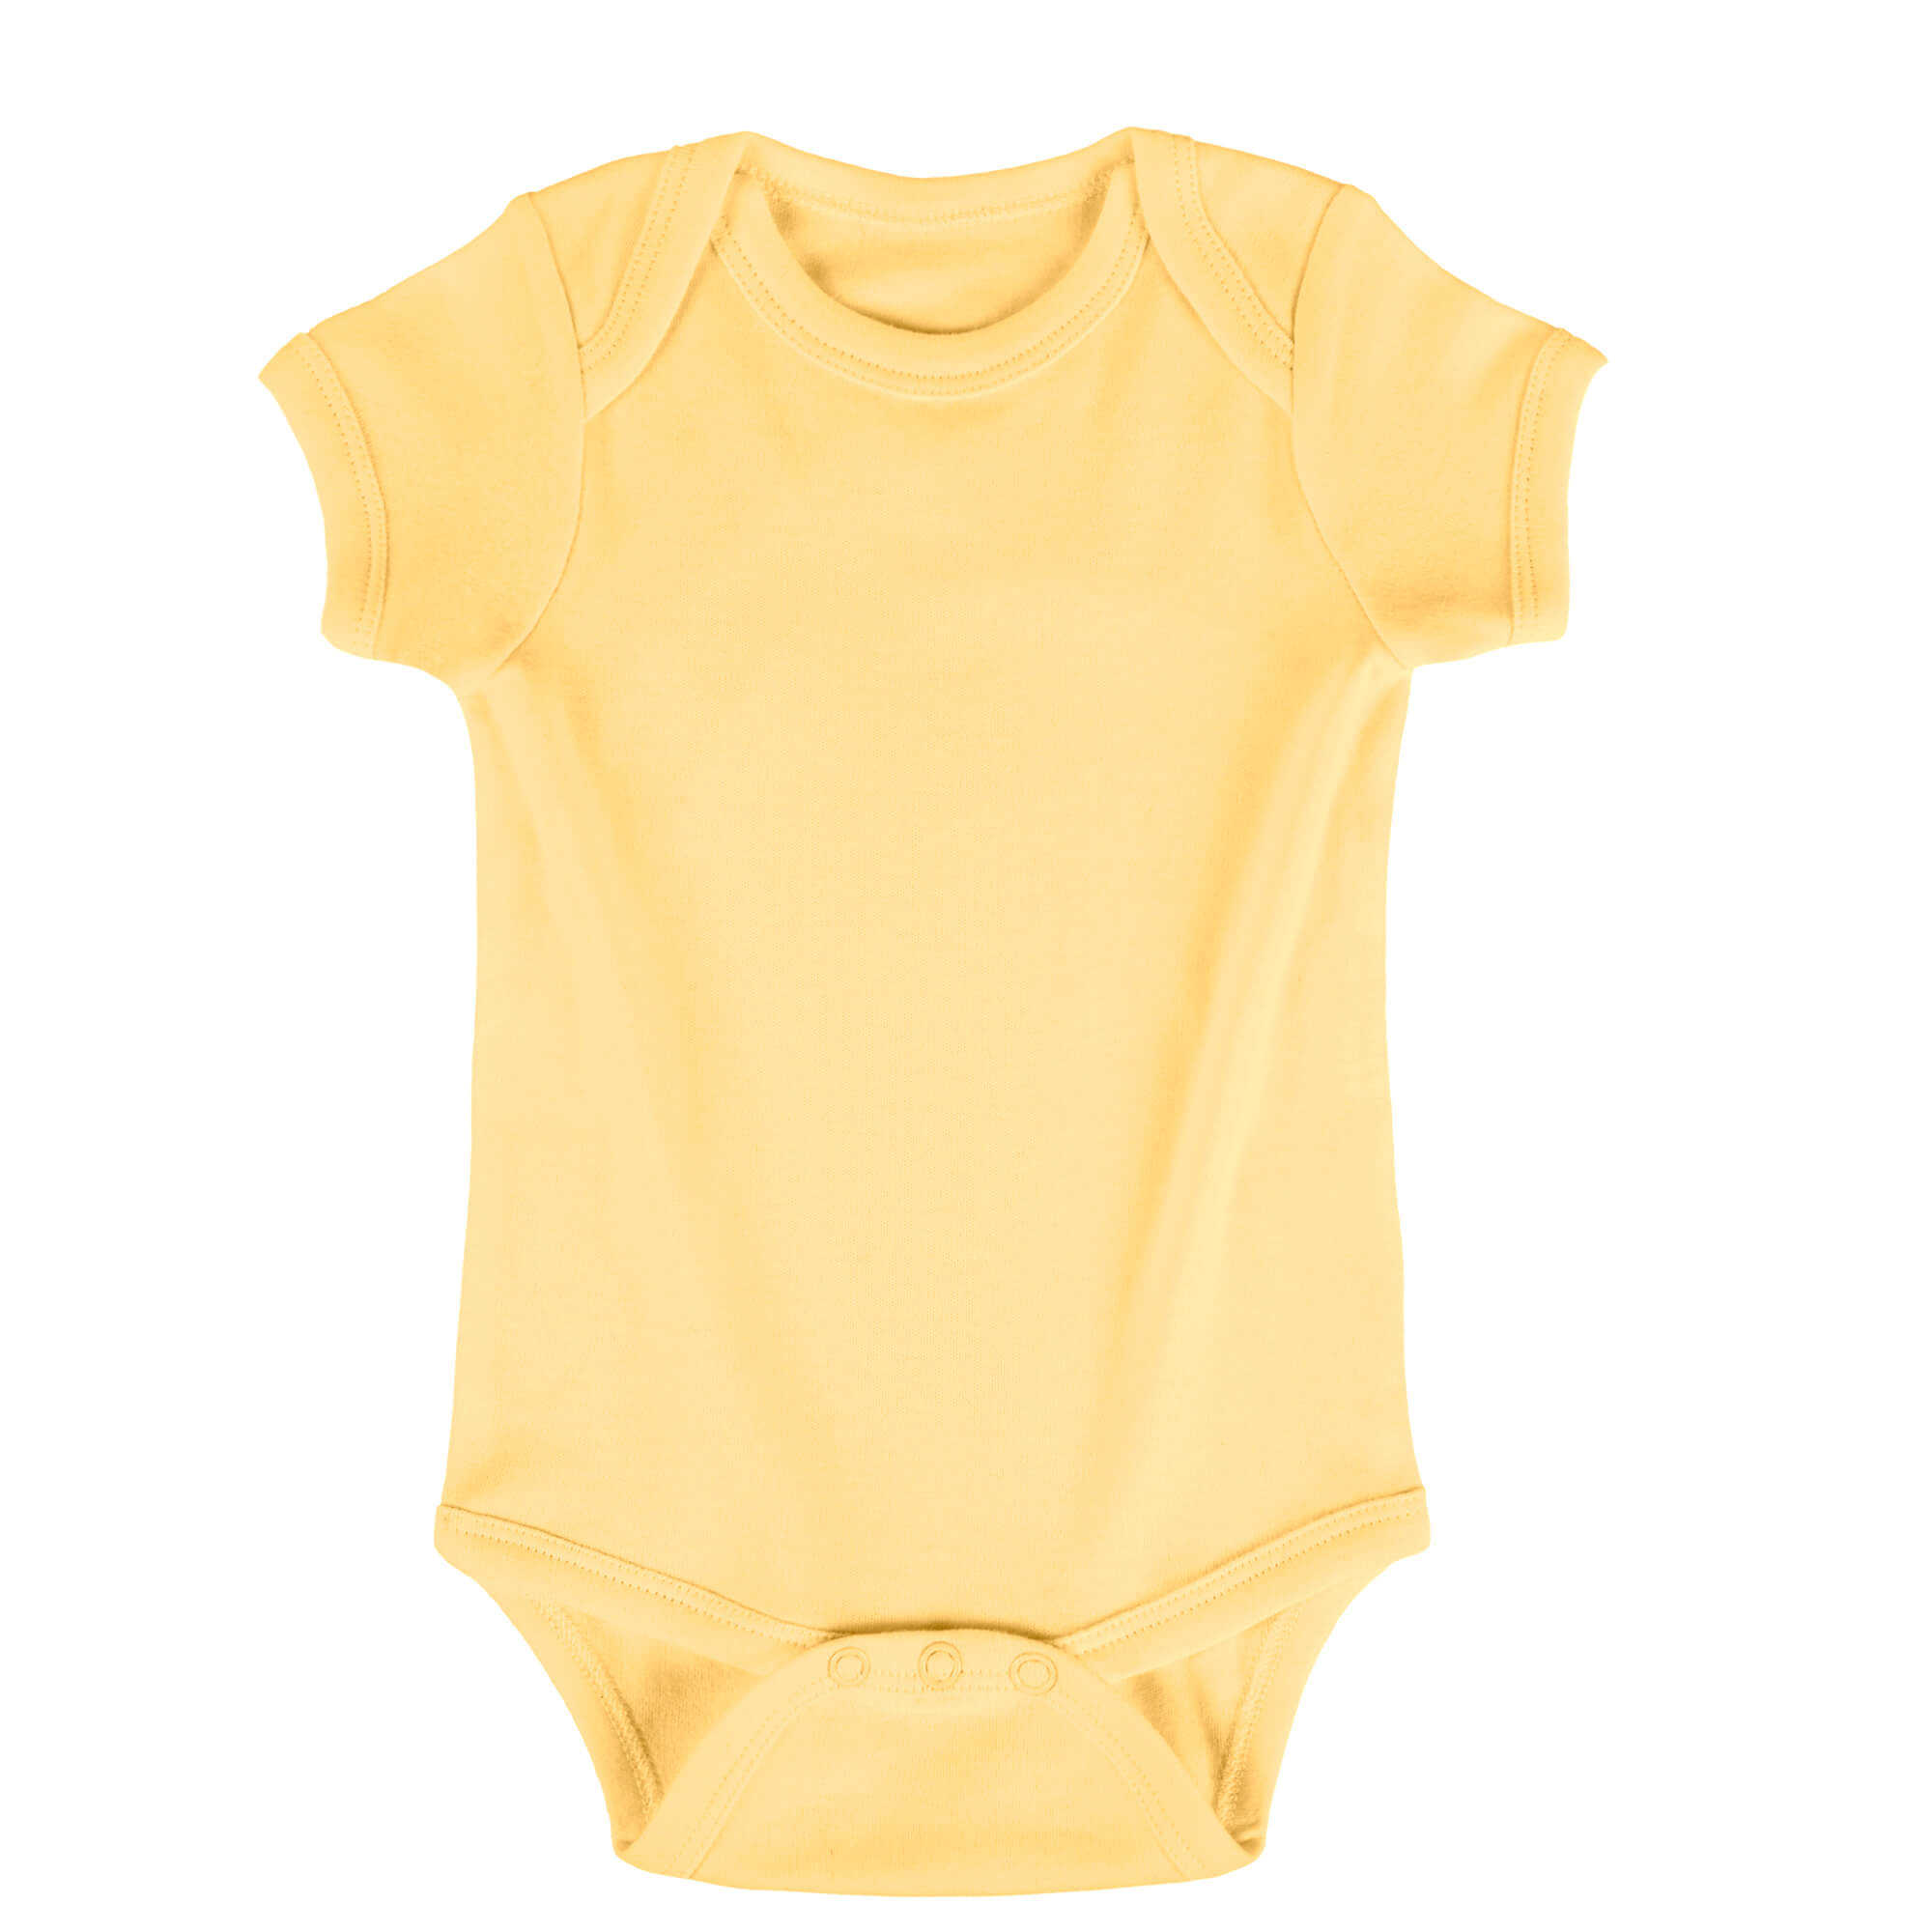 egg yolk yellow color number #22, onesie color selection, and color display.